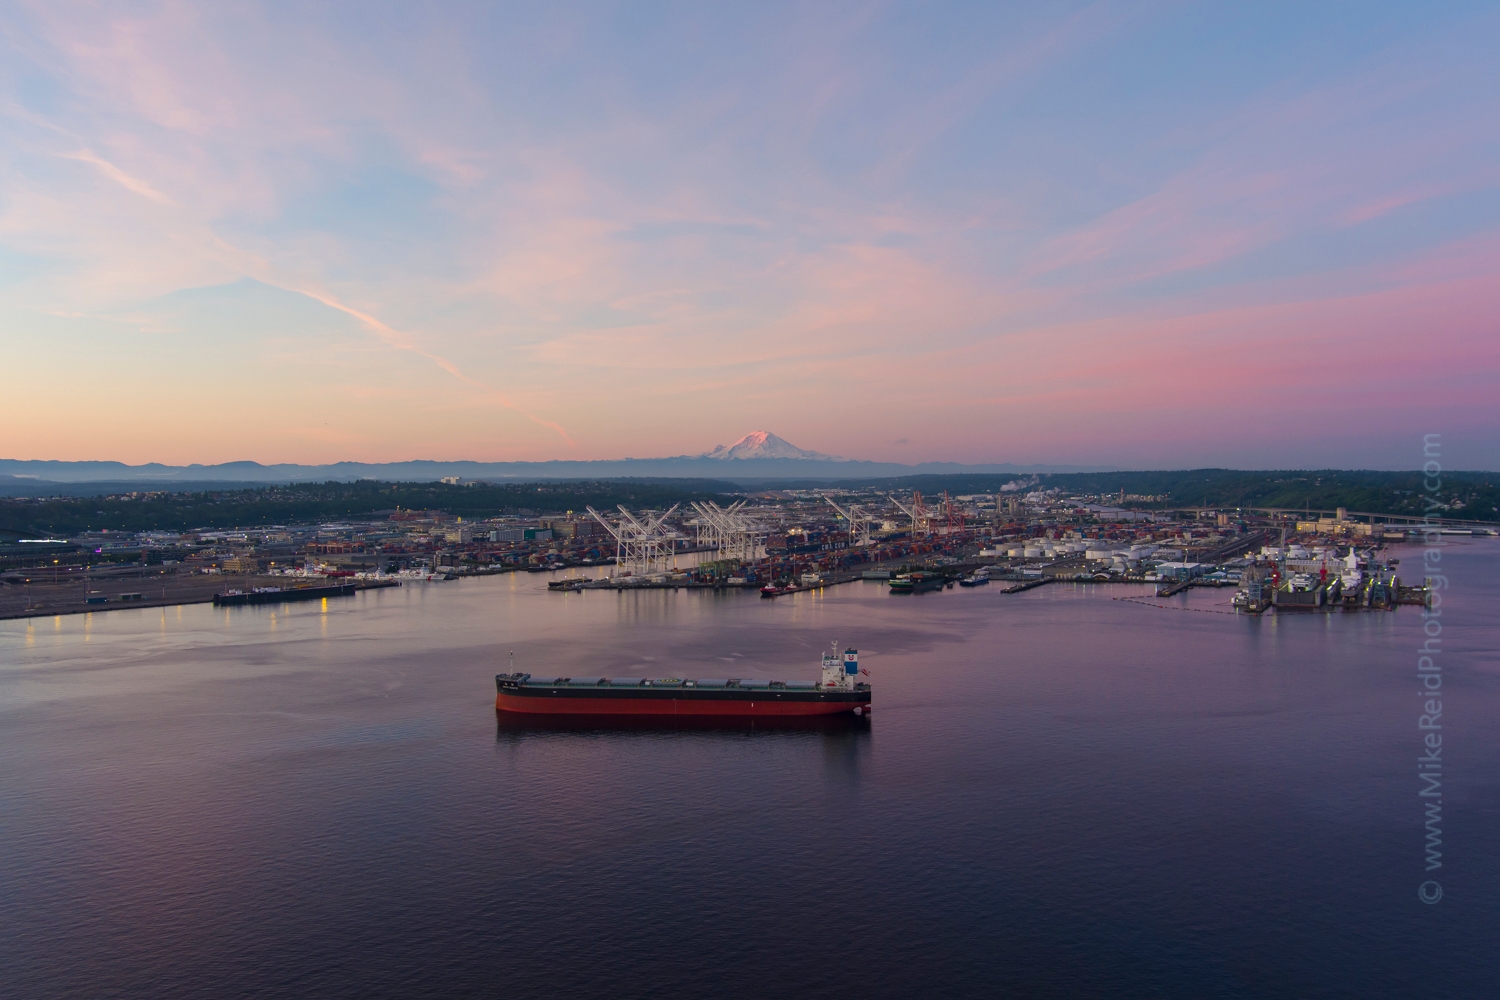 Over Seattle Port of Seattle and Mount Rainie #seattle #dronephotography #dronevideo #aerial #aerialphotography #aerialvideo #northwest #washingtonstate